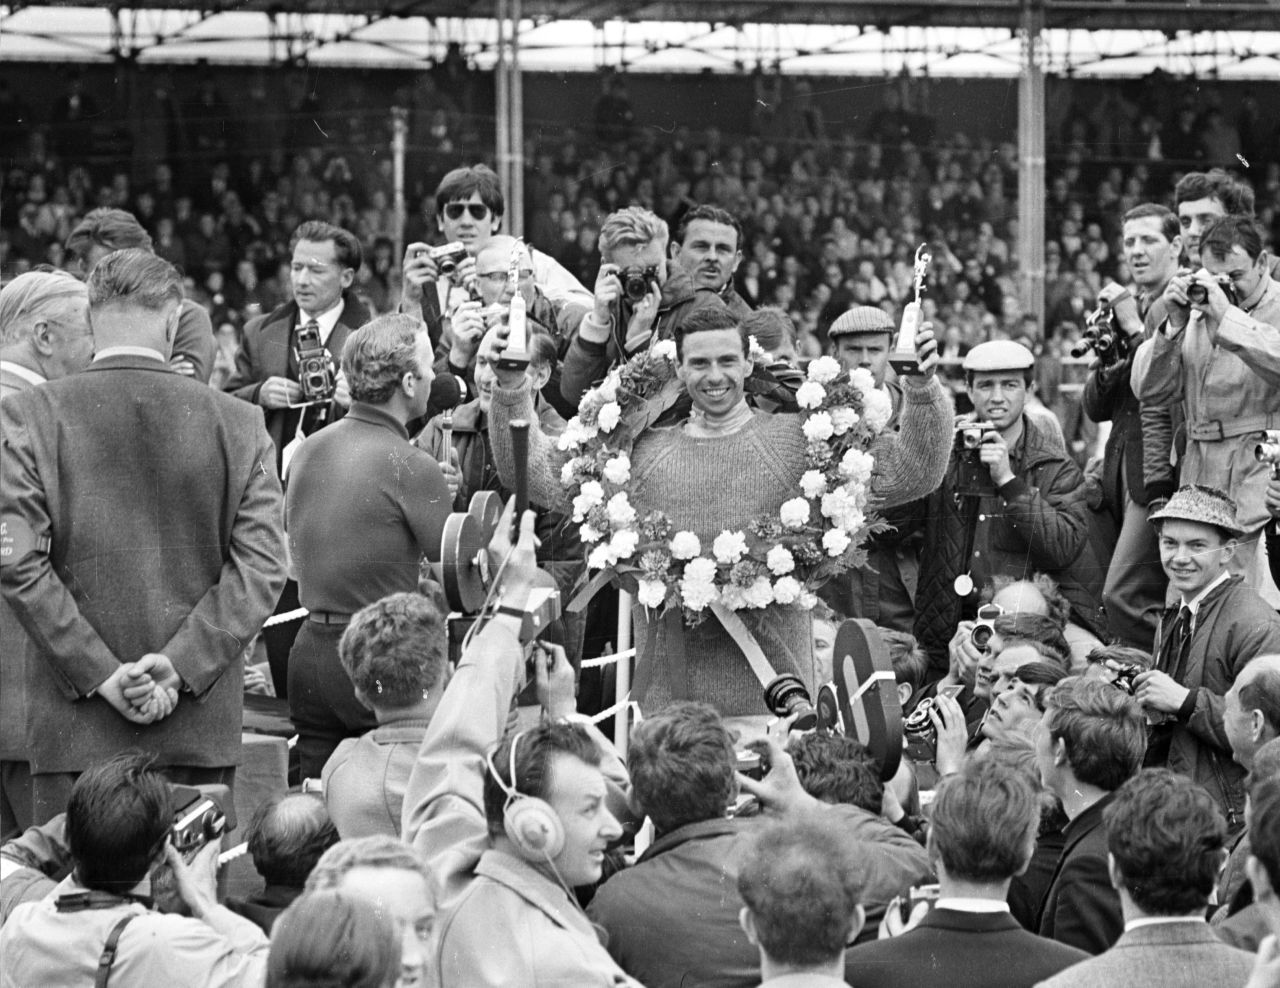 Briton Clark, pictured here celebrating his 1965 win at Silverstone, was one of F1's greatest drivers, winning the world title twice. 